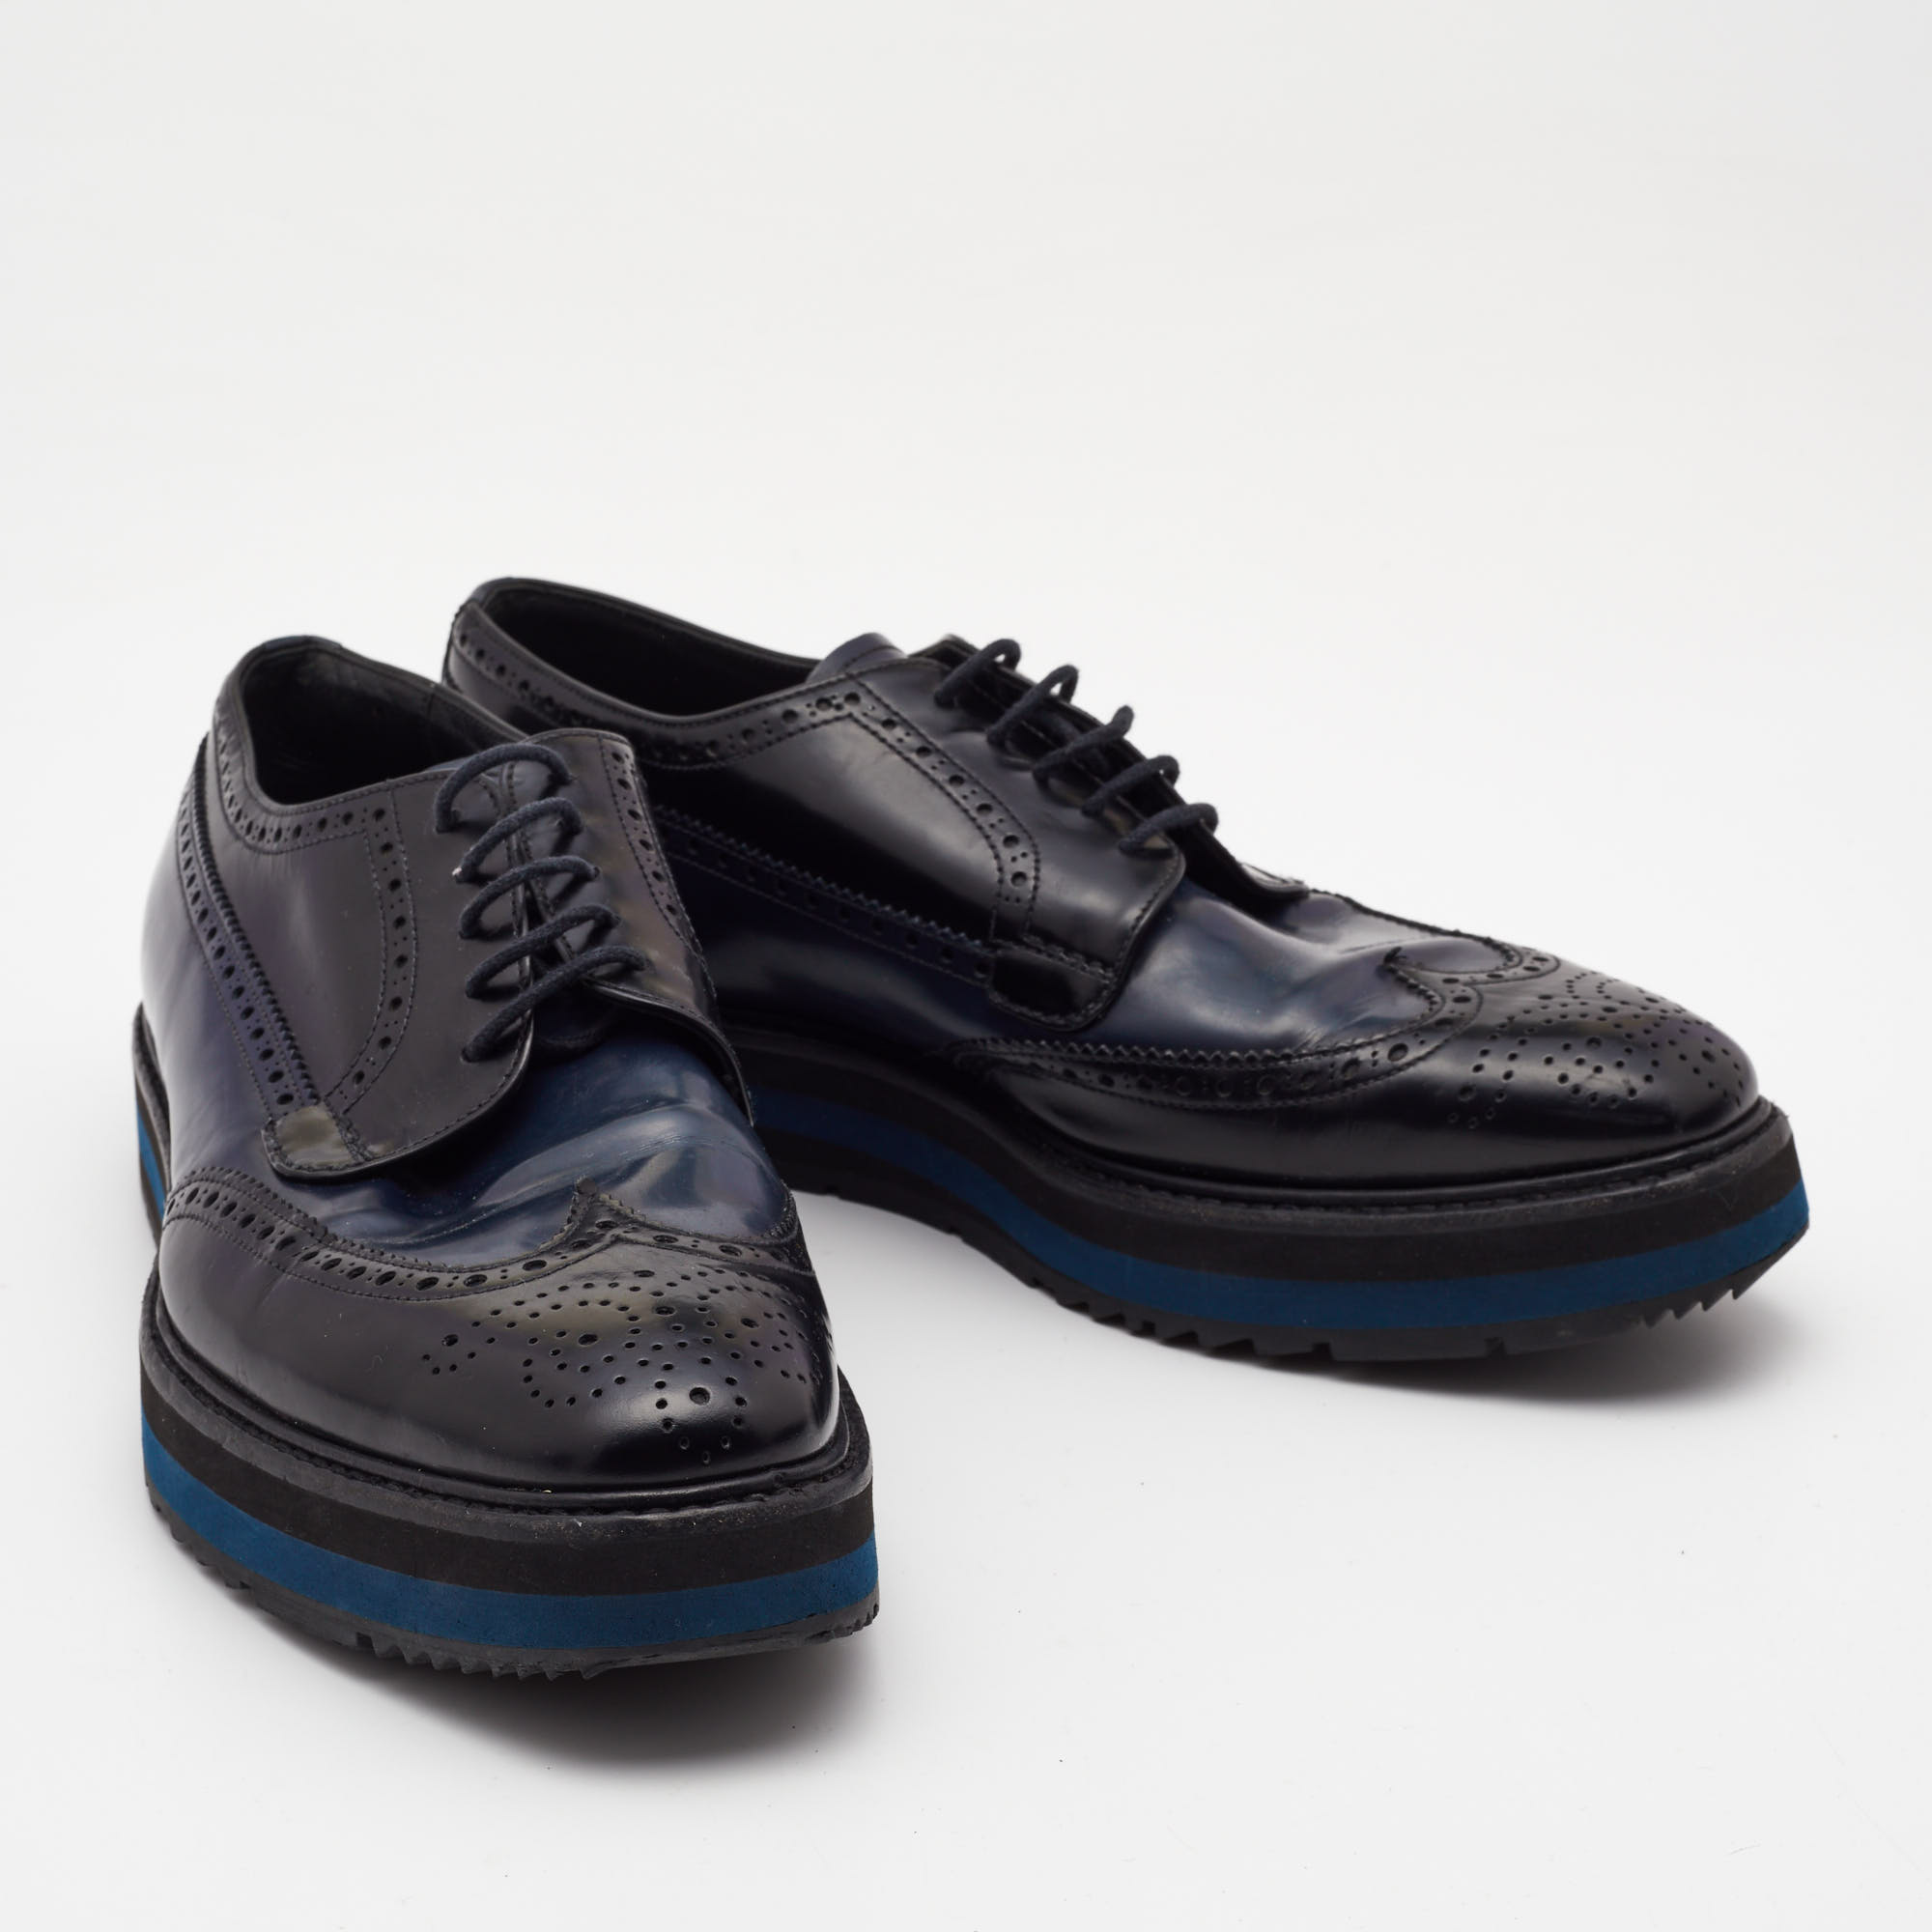 Prada Black/Navy Blue Patent Leather Brogue Oxford Sneakers Size 39